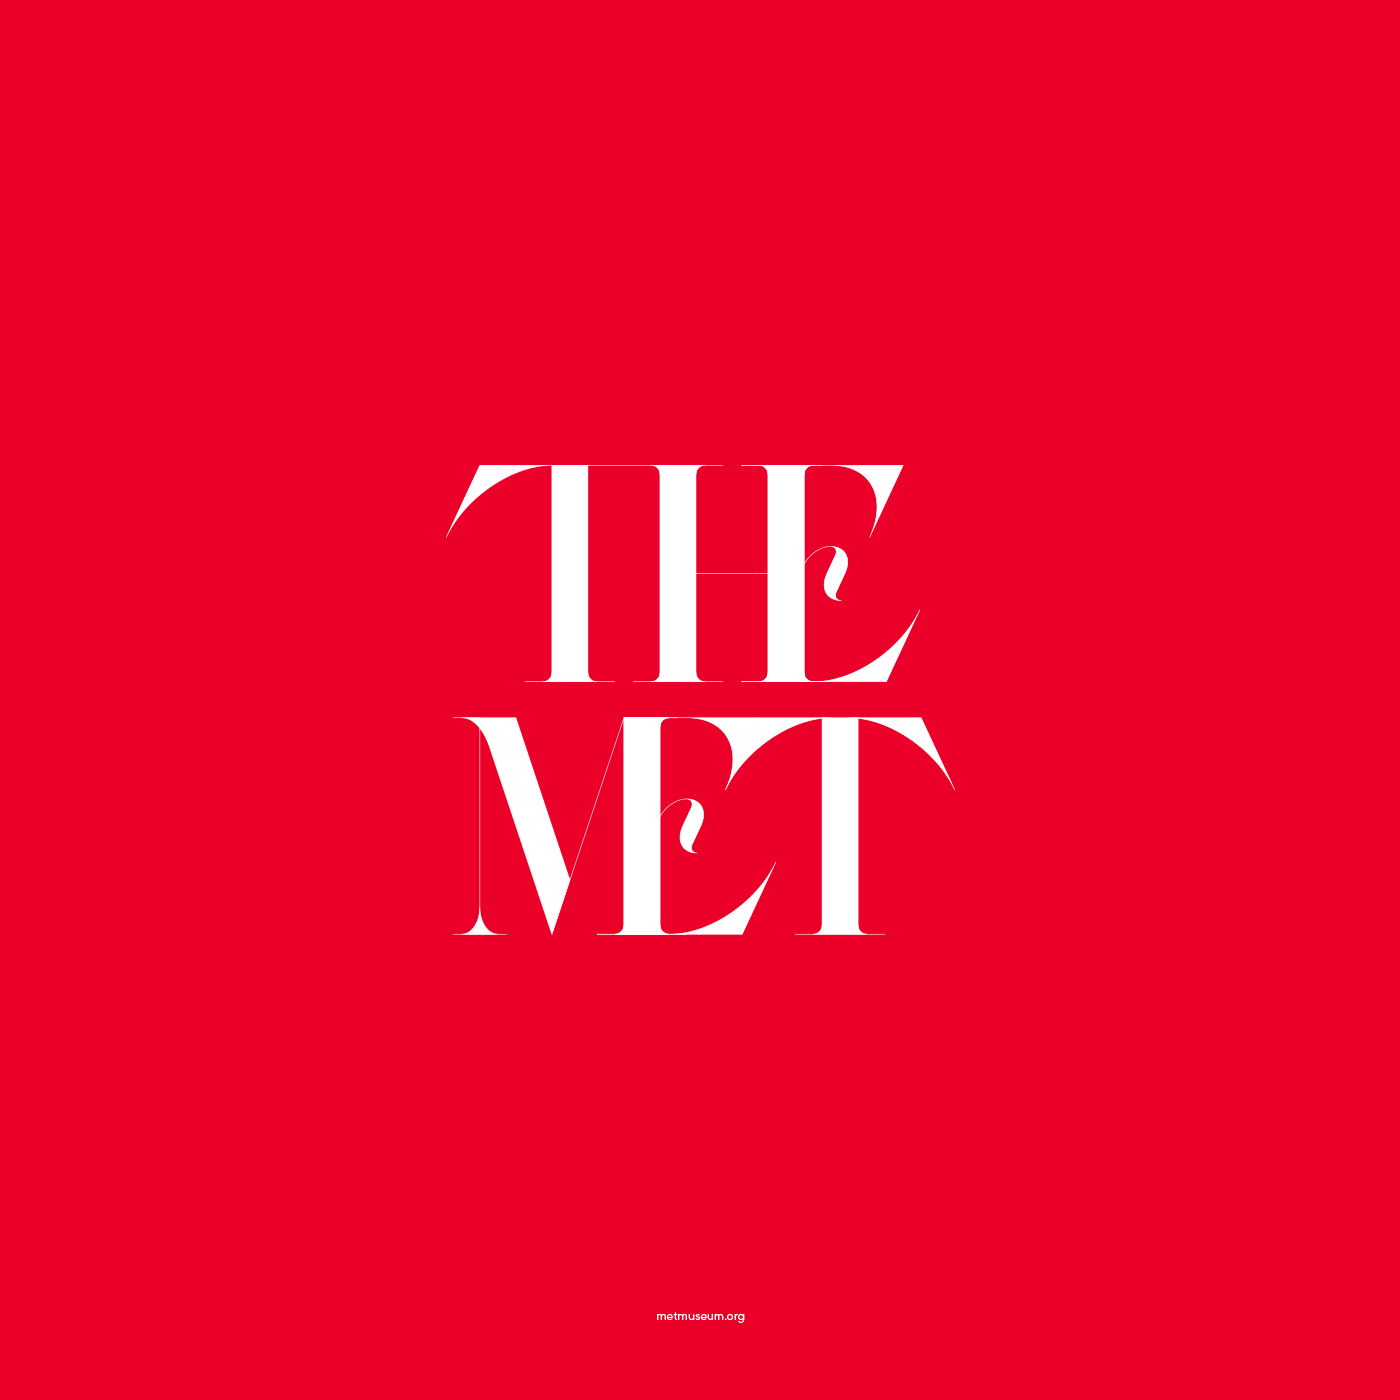 Fictive rebranding for The Met using the LEA Typeface.